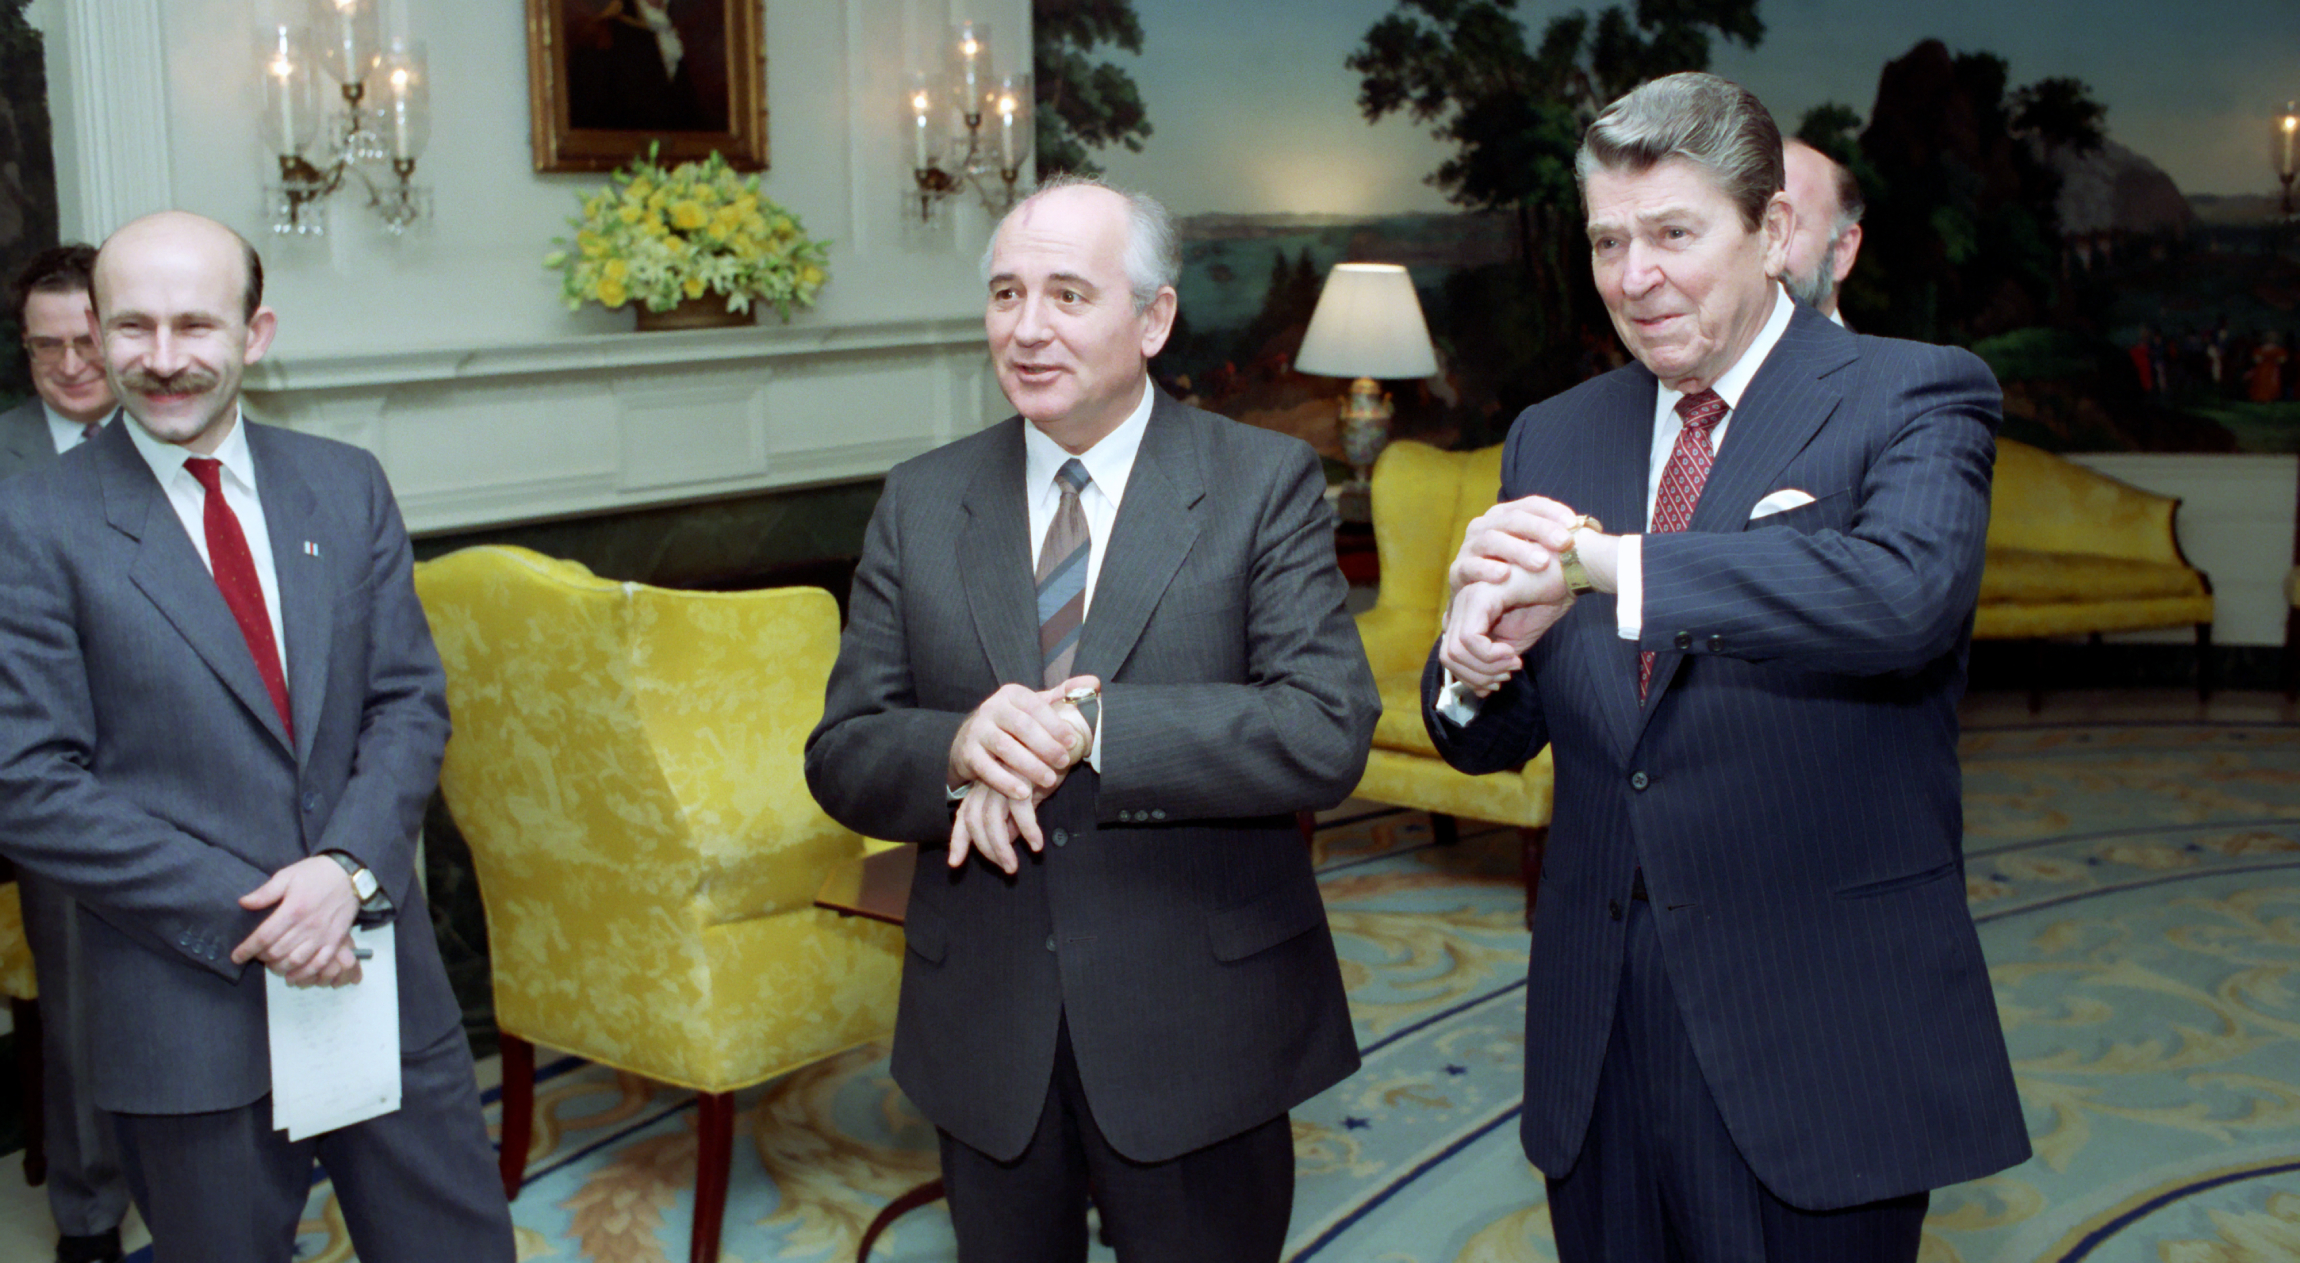  President Ronald Reagan and General Secretary Mikhail Gorbachev at The White House, 9 December 1987. Source: US National Archives.